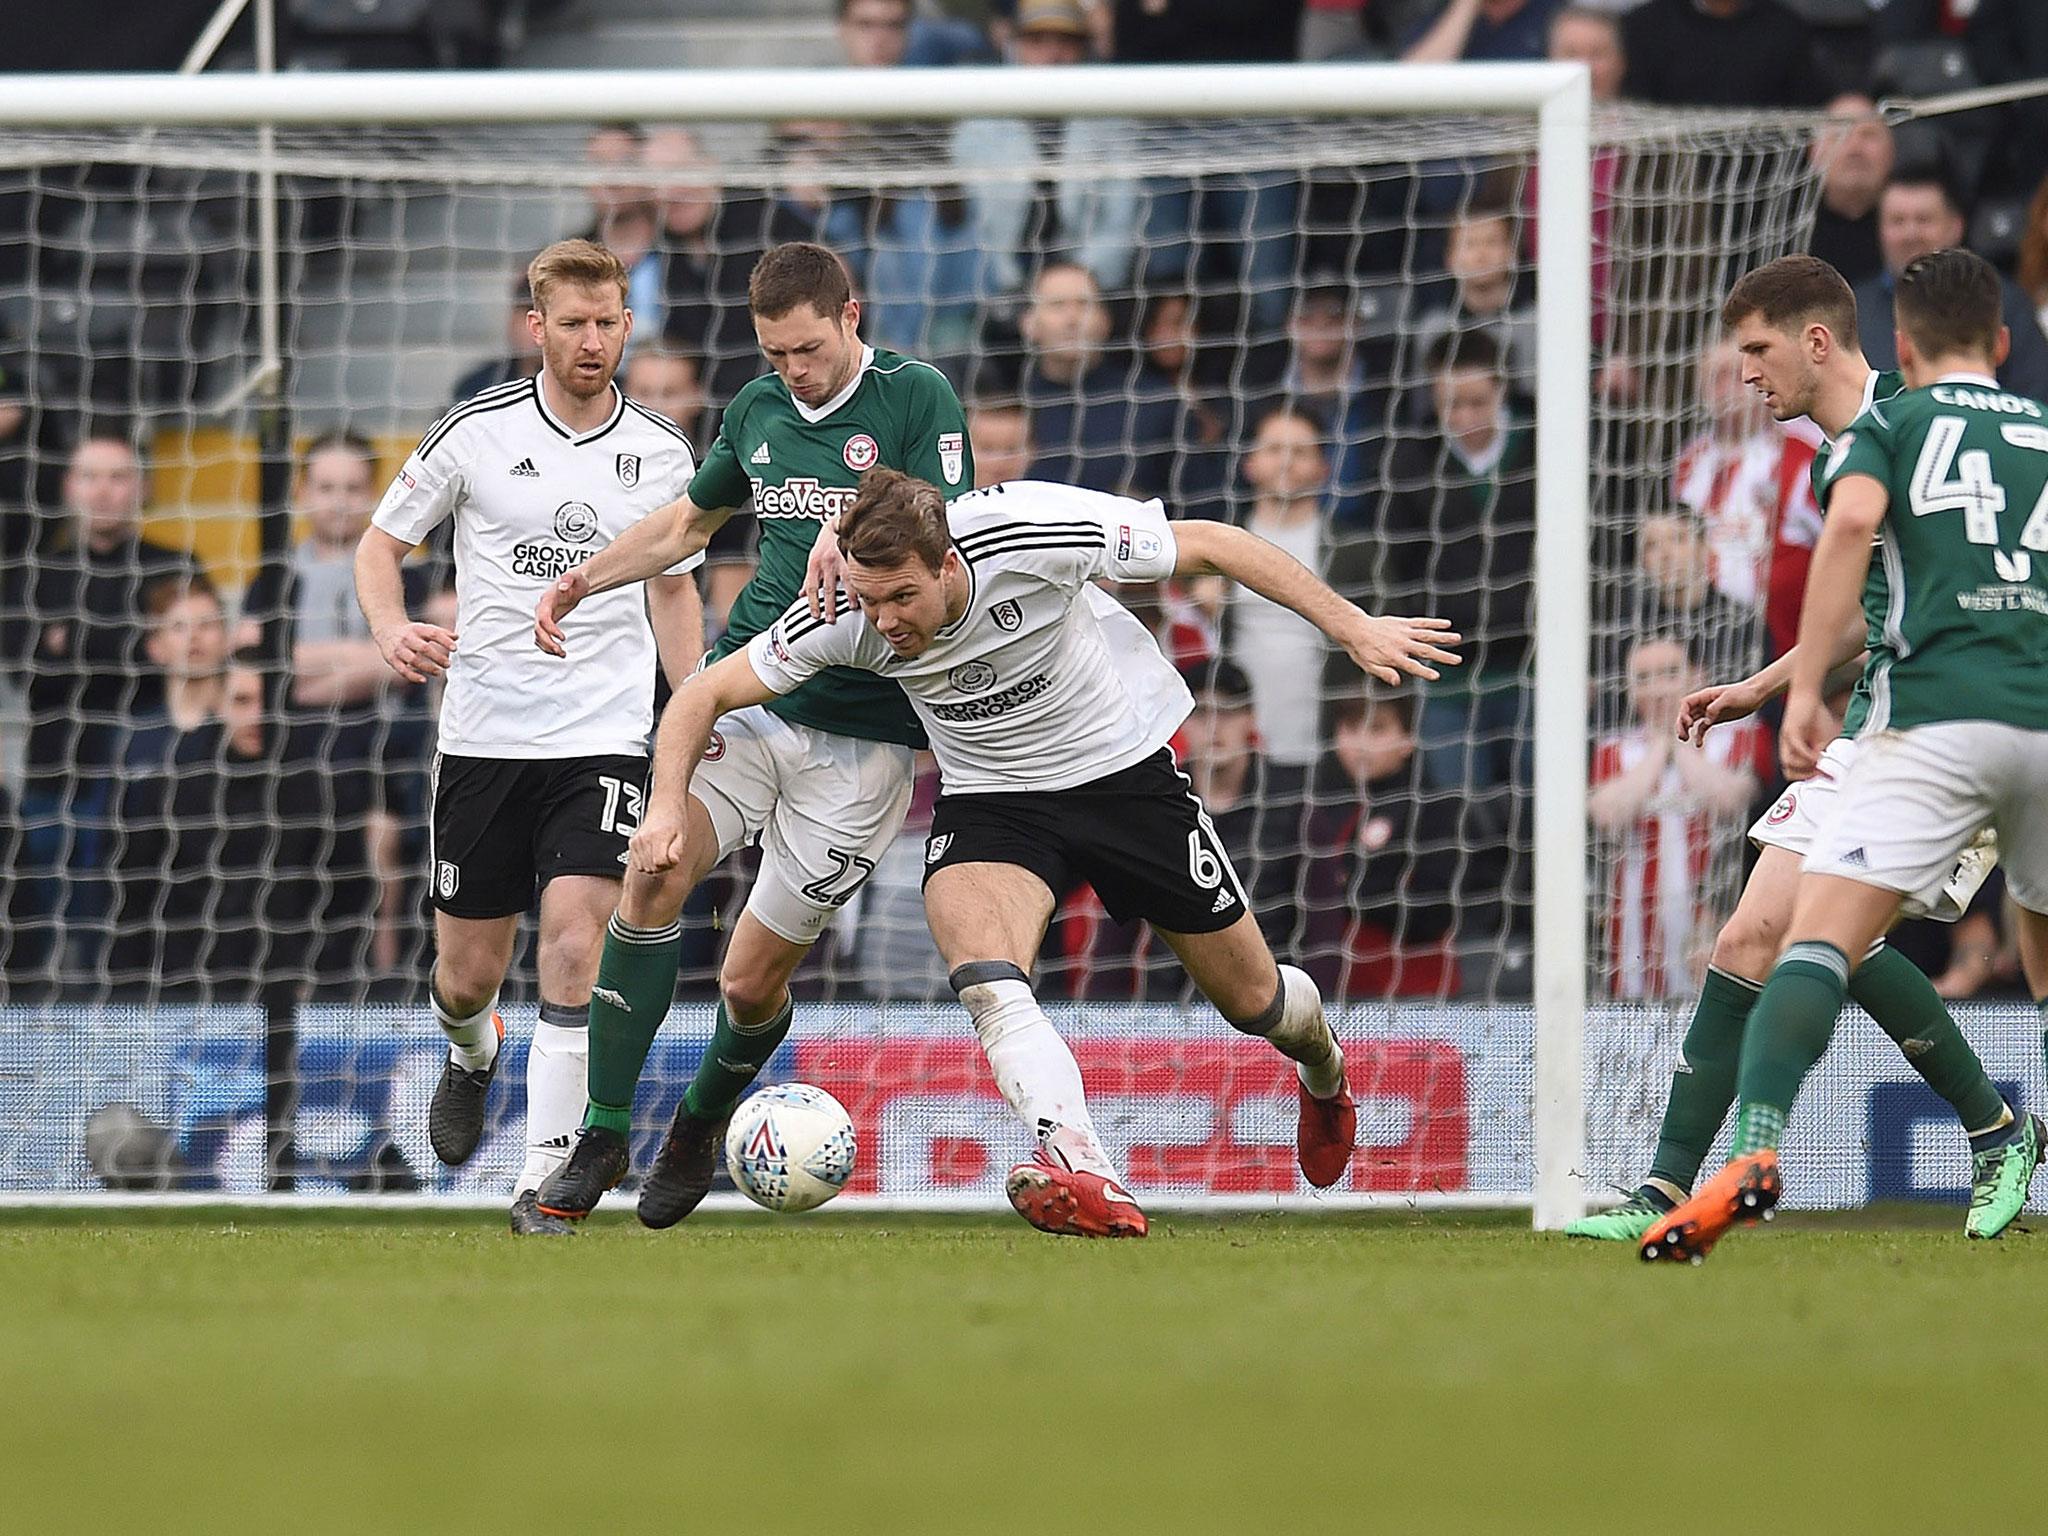 Fulham came undone in the dying minutes of the game